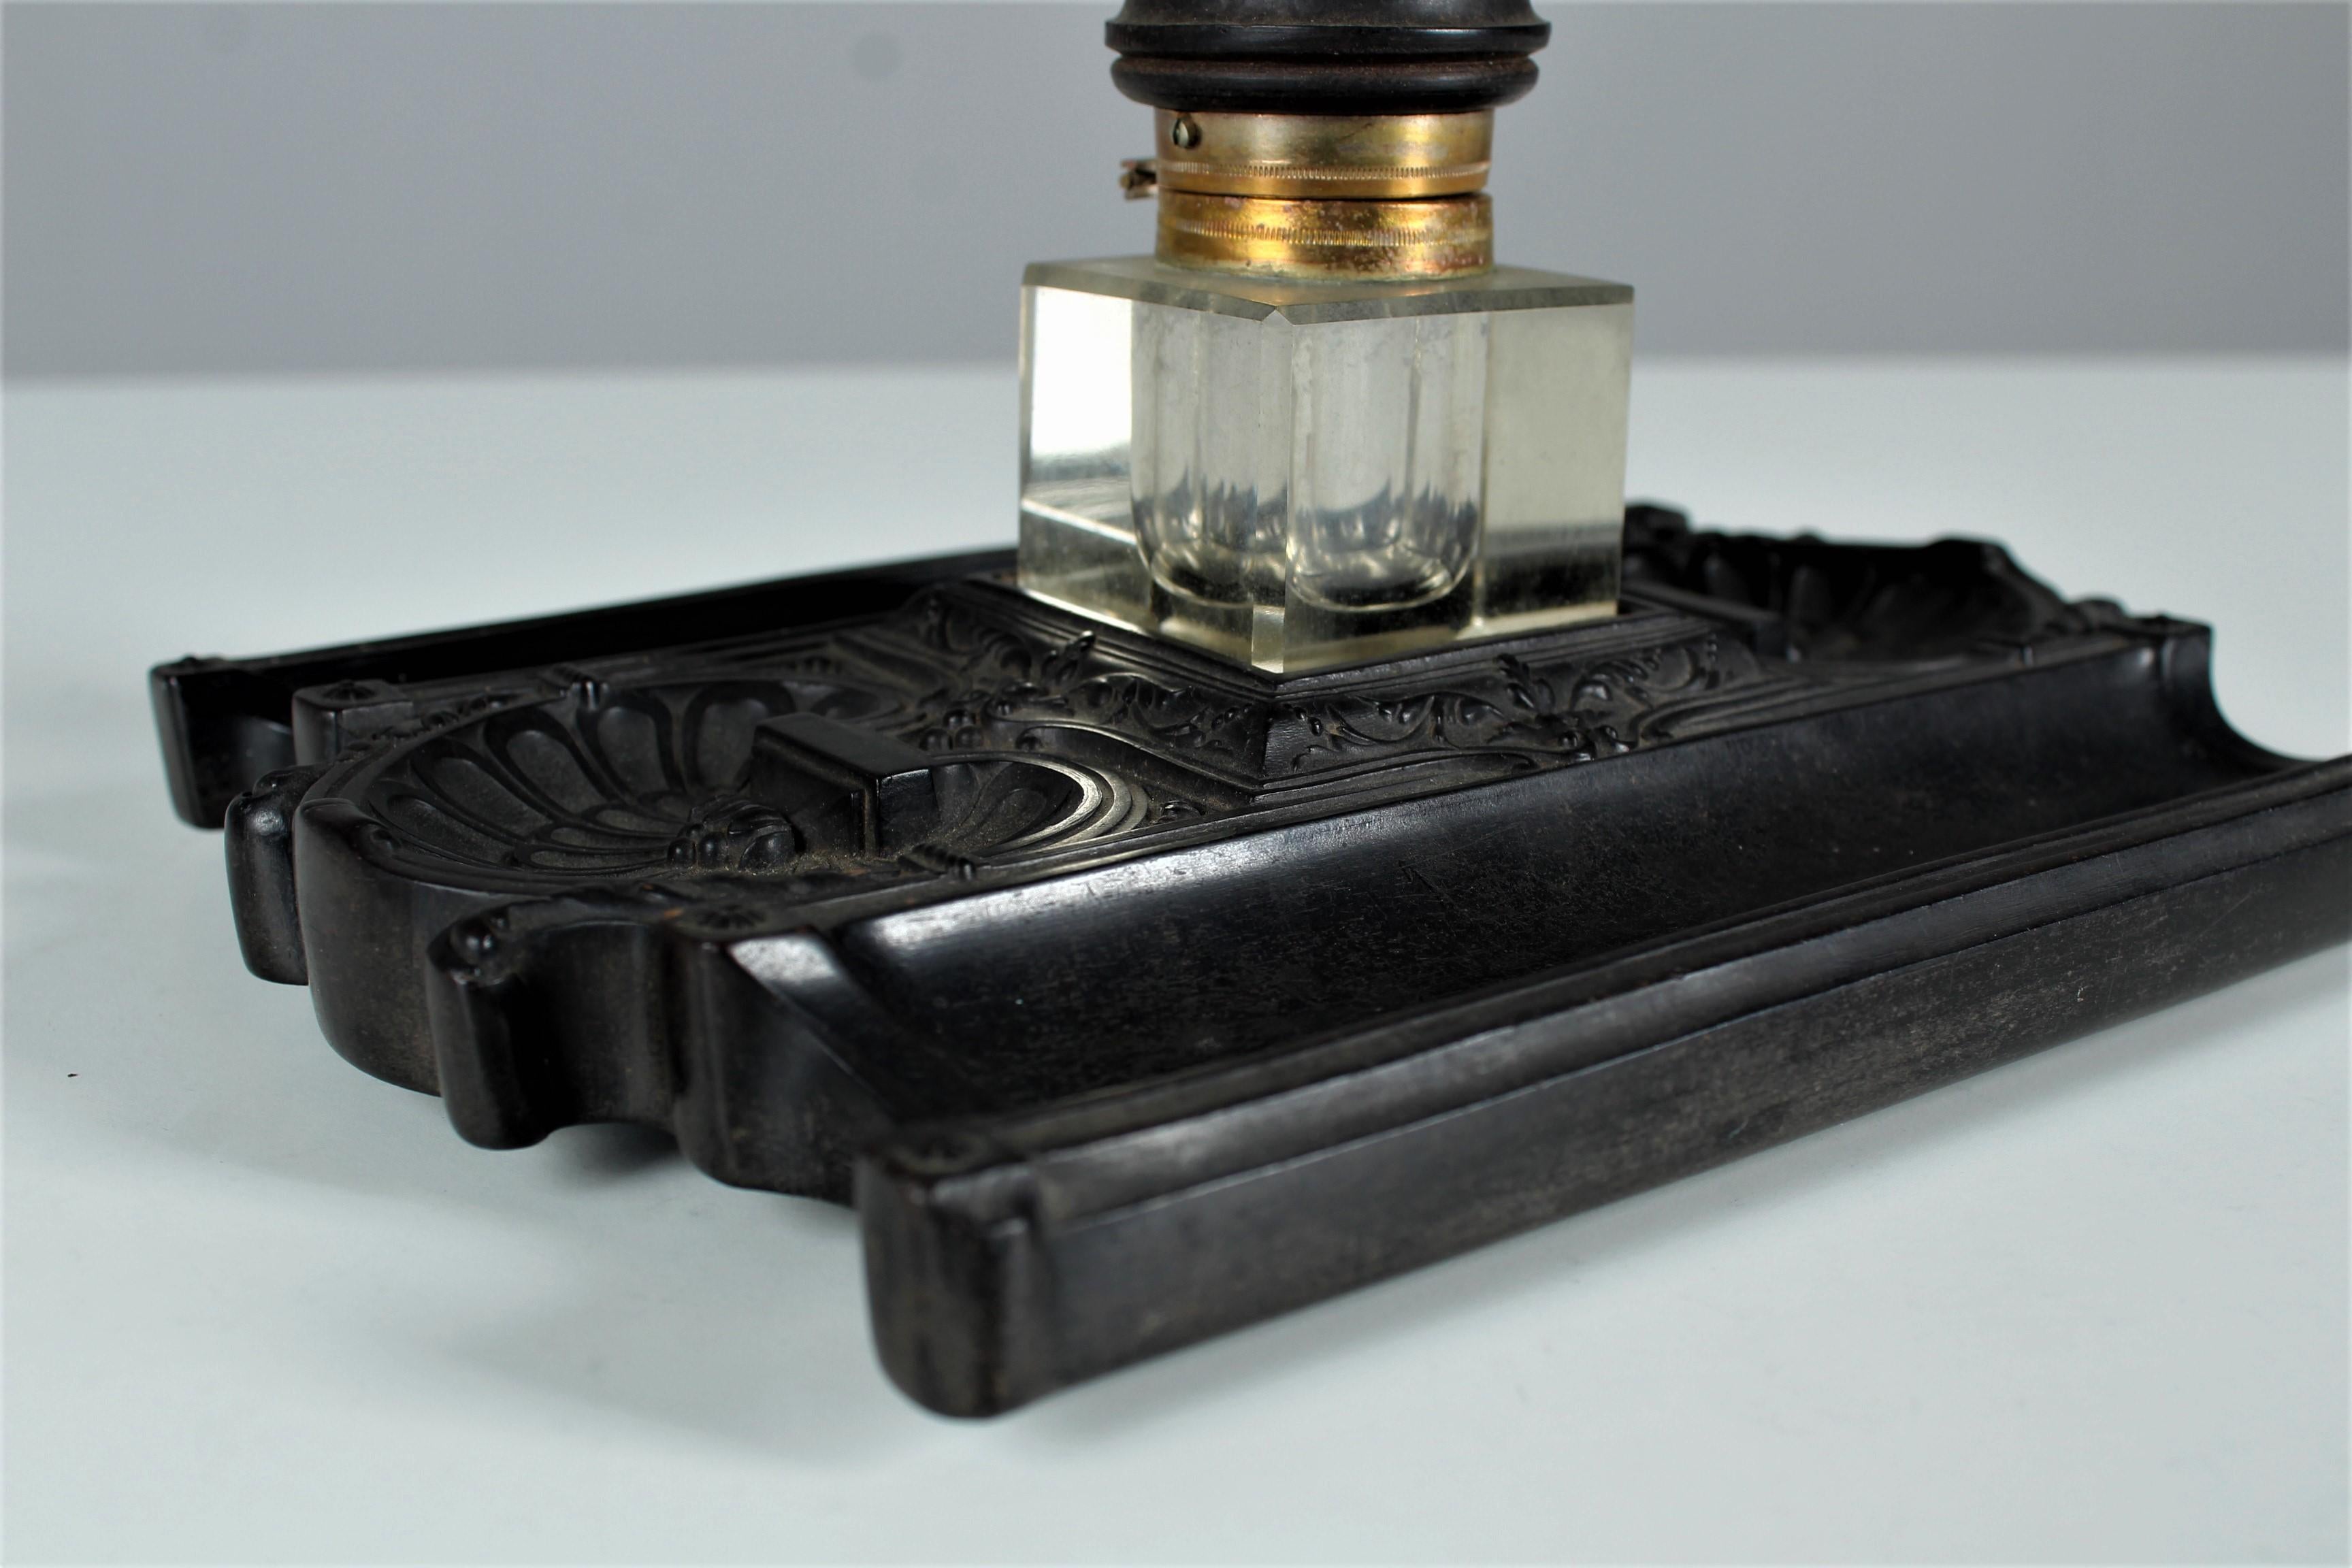 19th Century Antique Gutta-Percha Inkwell, Desk Pen Tray With Glass Insert, Circa 1880s For Sale